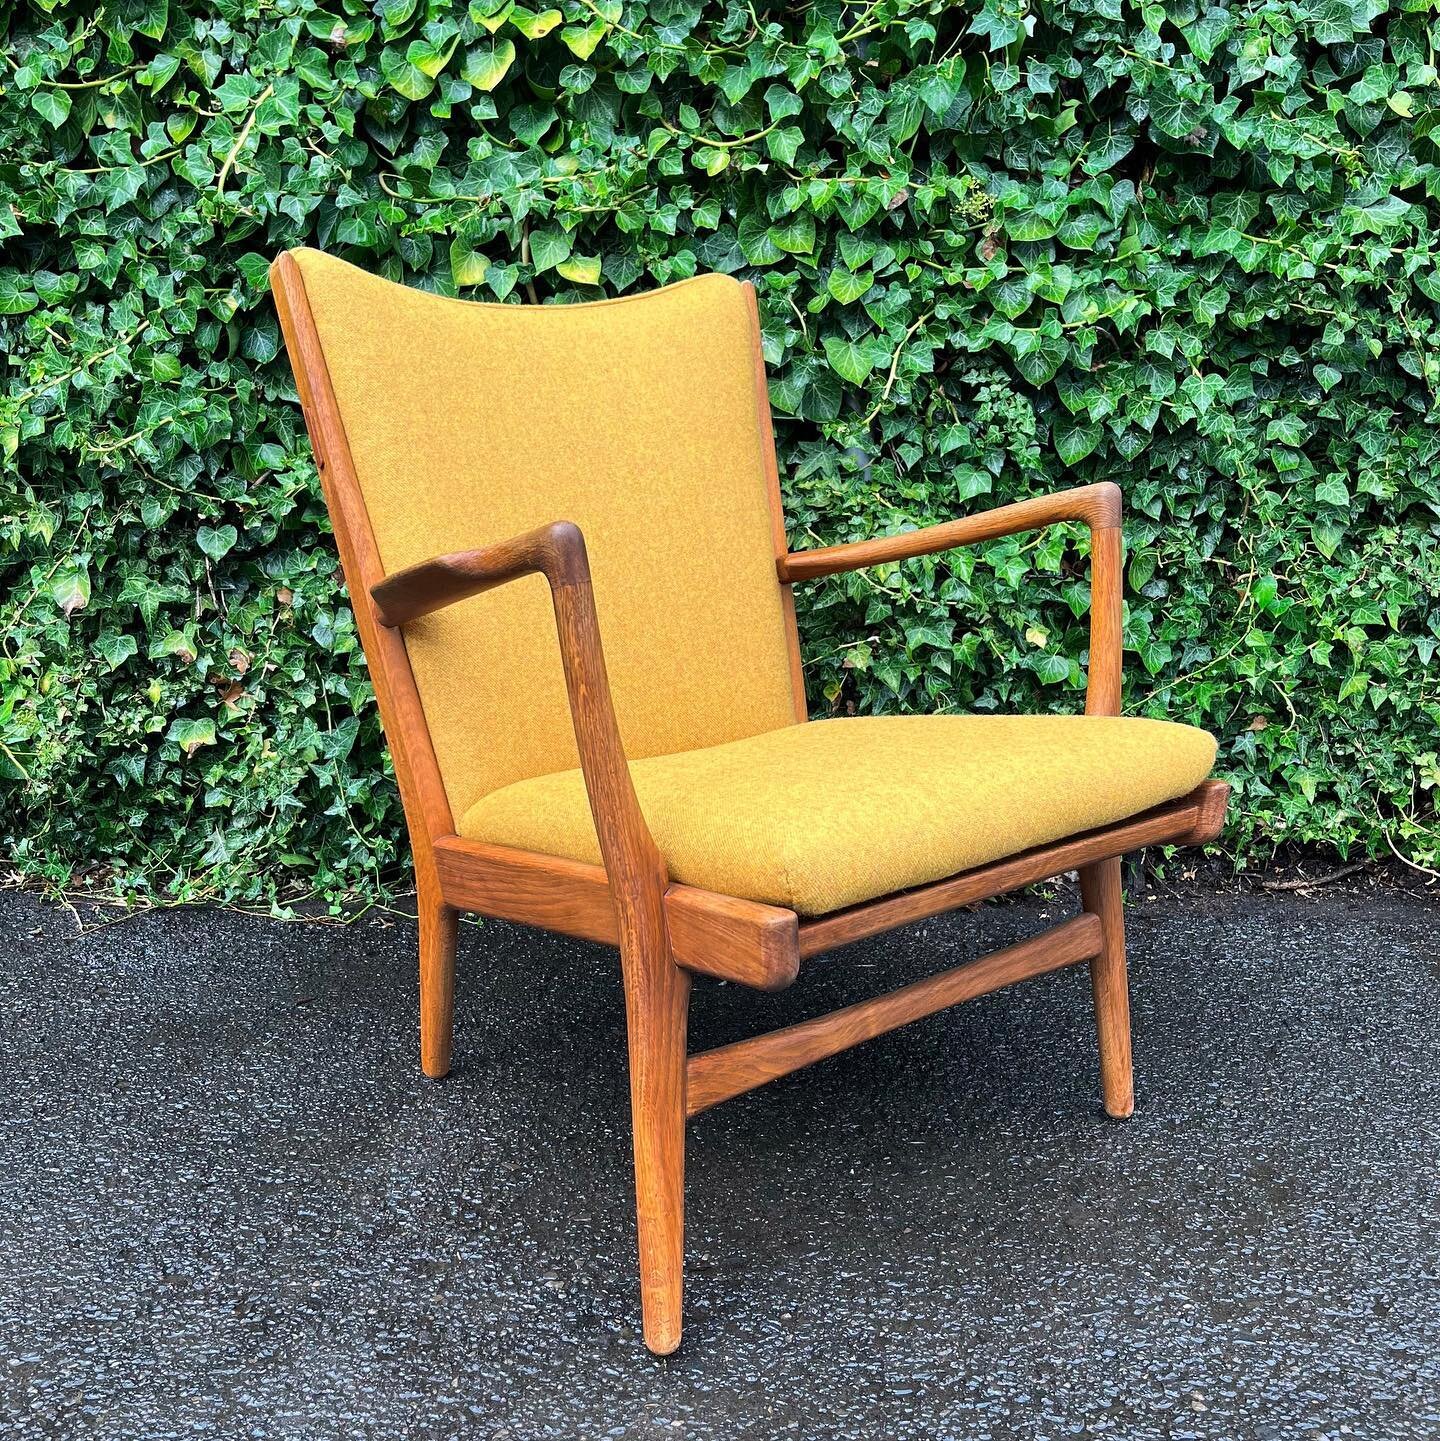 This absolute beauty is a Hans Wegner AP16 Armchair redone in a sunny #maharam wool. Amazing lines and gorgeous simple detail make this a very iconic chair, designed in 1951 by Hans J. Wegner and produced by A.P. Stolen in Denmark. It still had the o